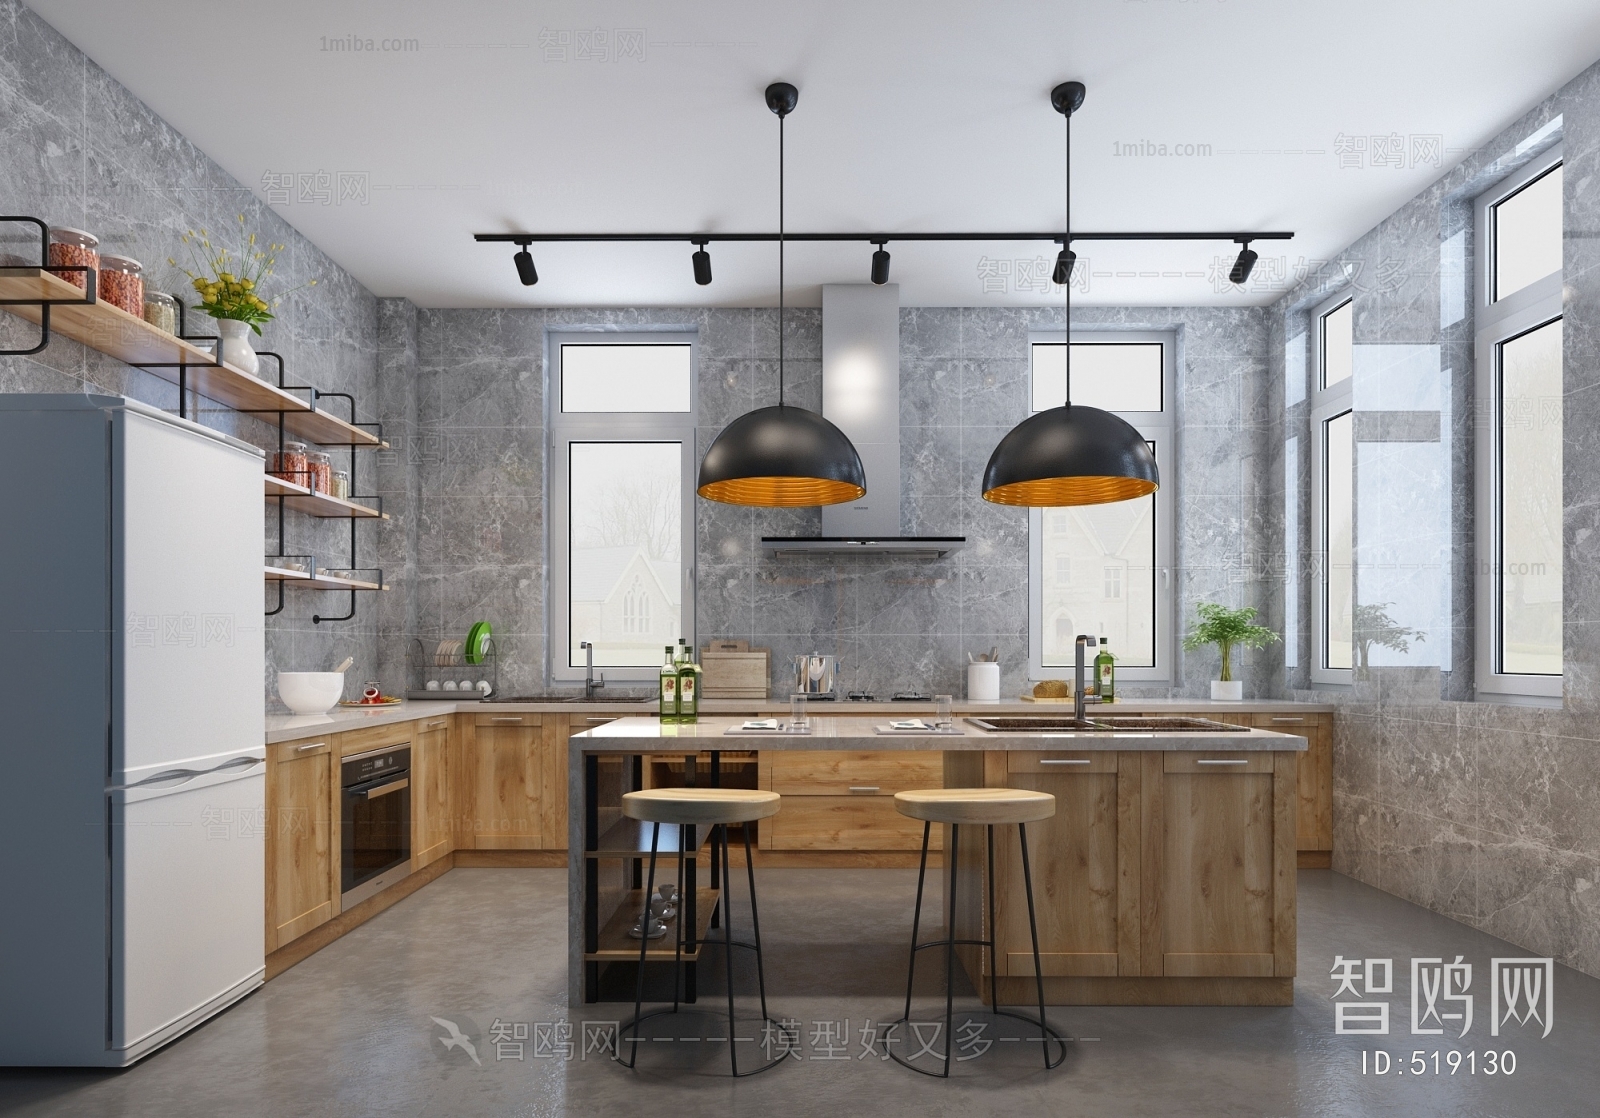 Industrial Style The Kitchen